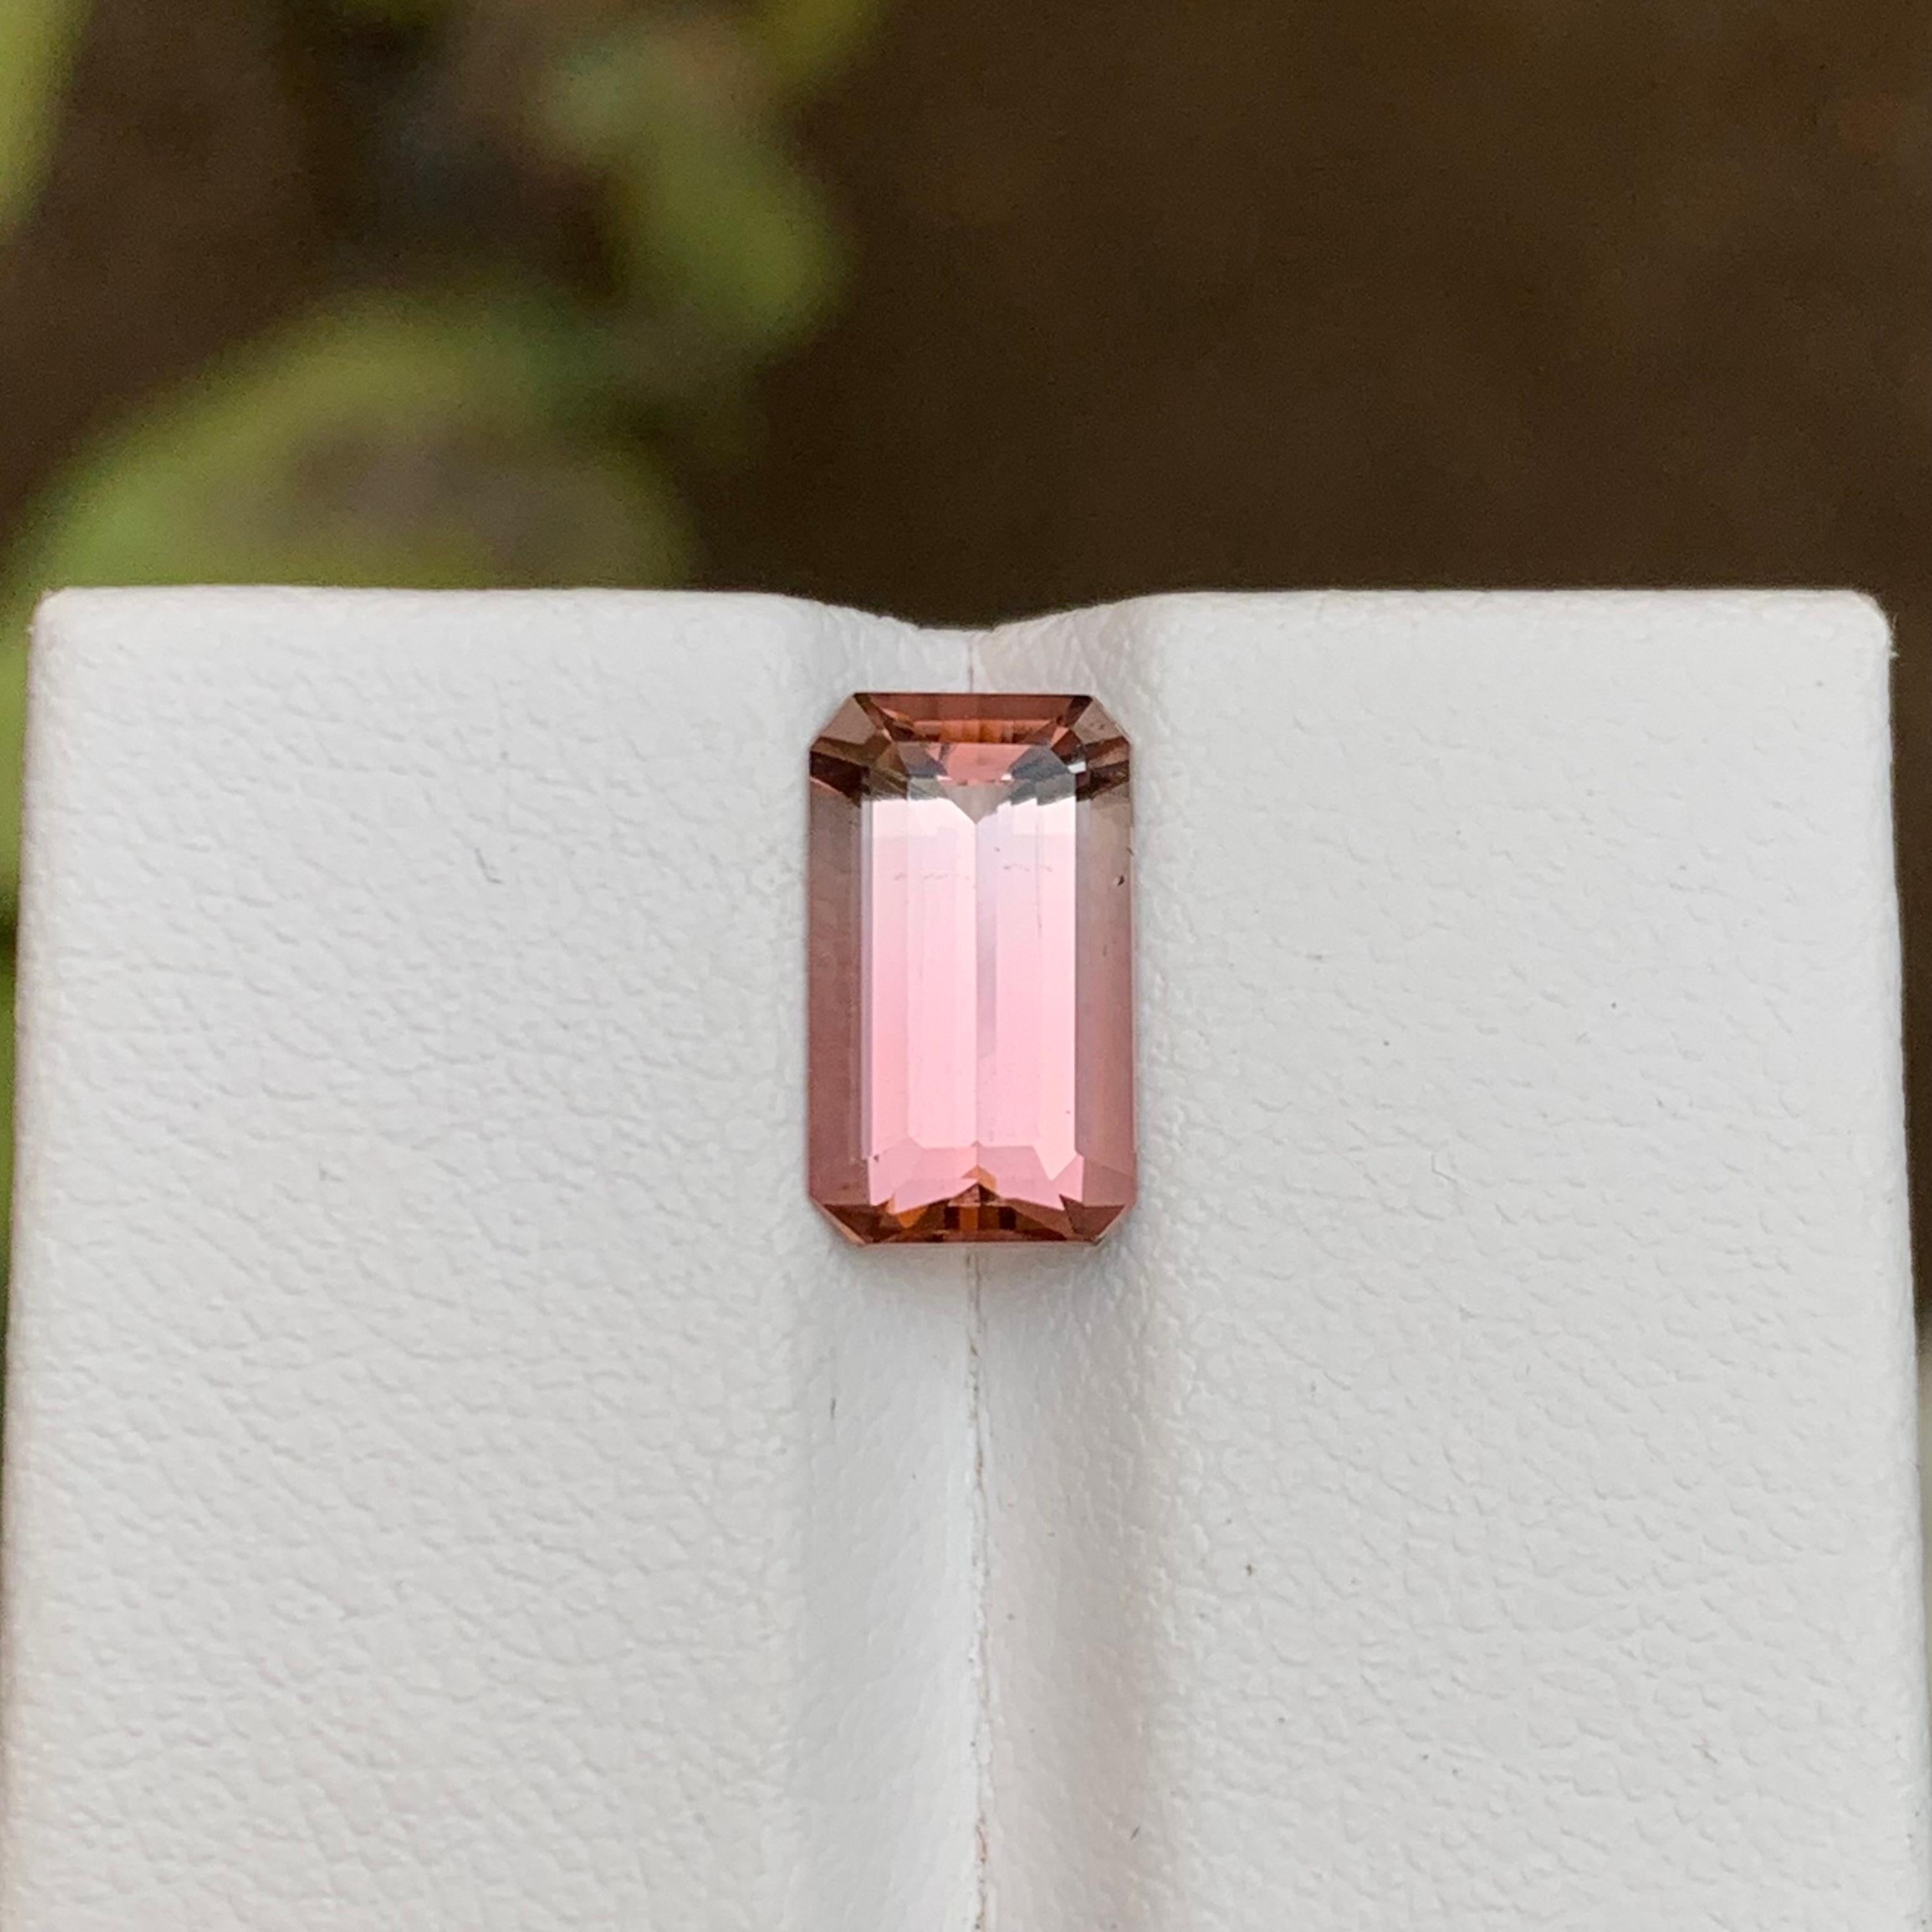 Rare Pink Natural Tourmaline Loose Gemstone 2.45 Ct Emerald Cut for Ring/Pendant For Sale 6